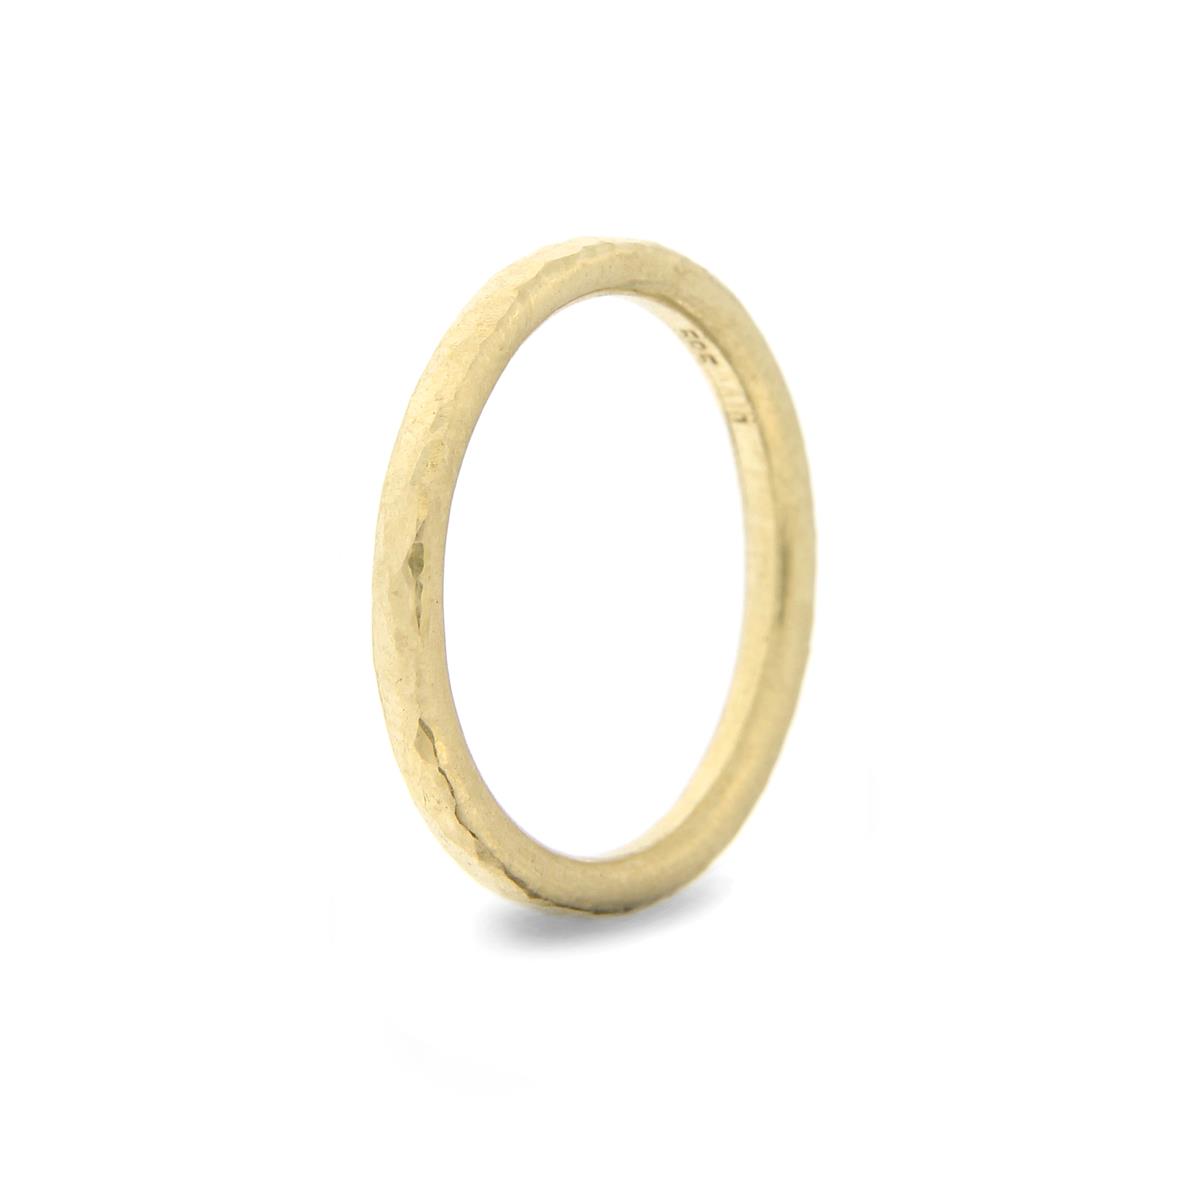 Katie g. Jewellery - Hammered Ring 2,0mm - Champ Gold_1